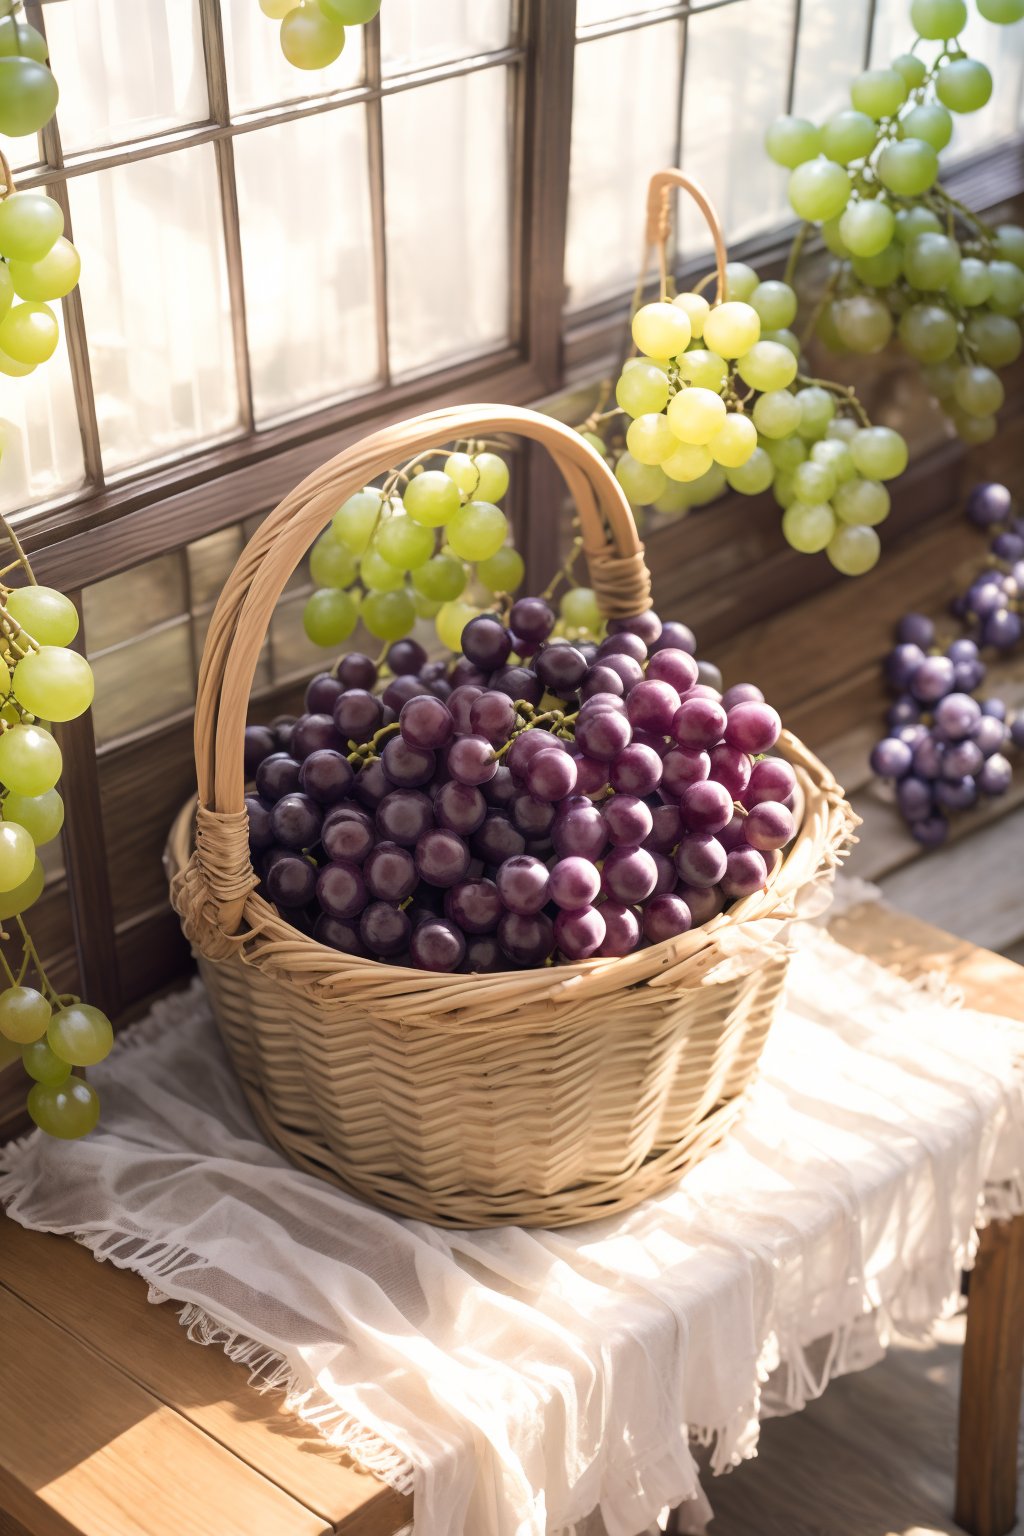 A still life of a bounty of plump, juicy grapes spilling out of a wicker basket on a rustic wooden table. Soft, warm sunlight filters through the window casting a gentle glow on the fruit's translucent skin. The camera frames the arrangement from directly above, showcasing the vibrant purple hue and the way the grapes seem to tumble into a natural heap.